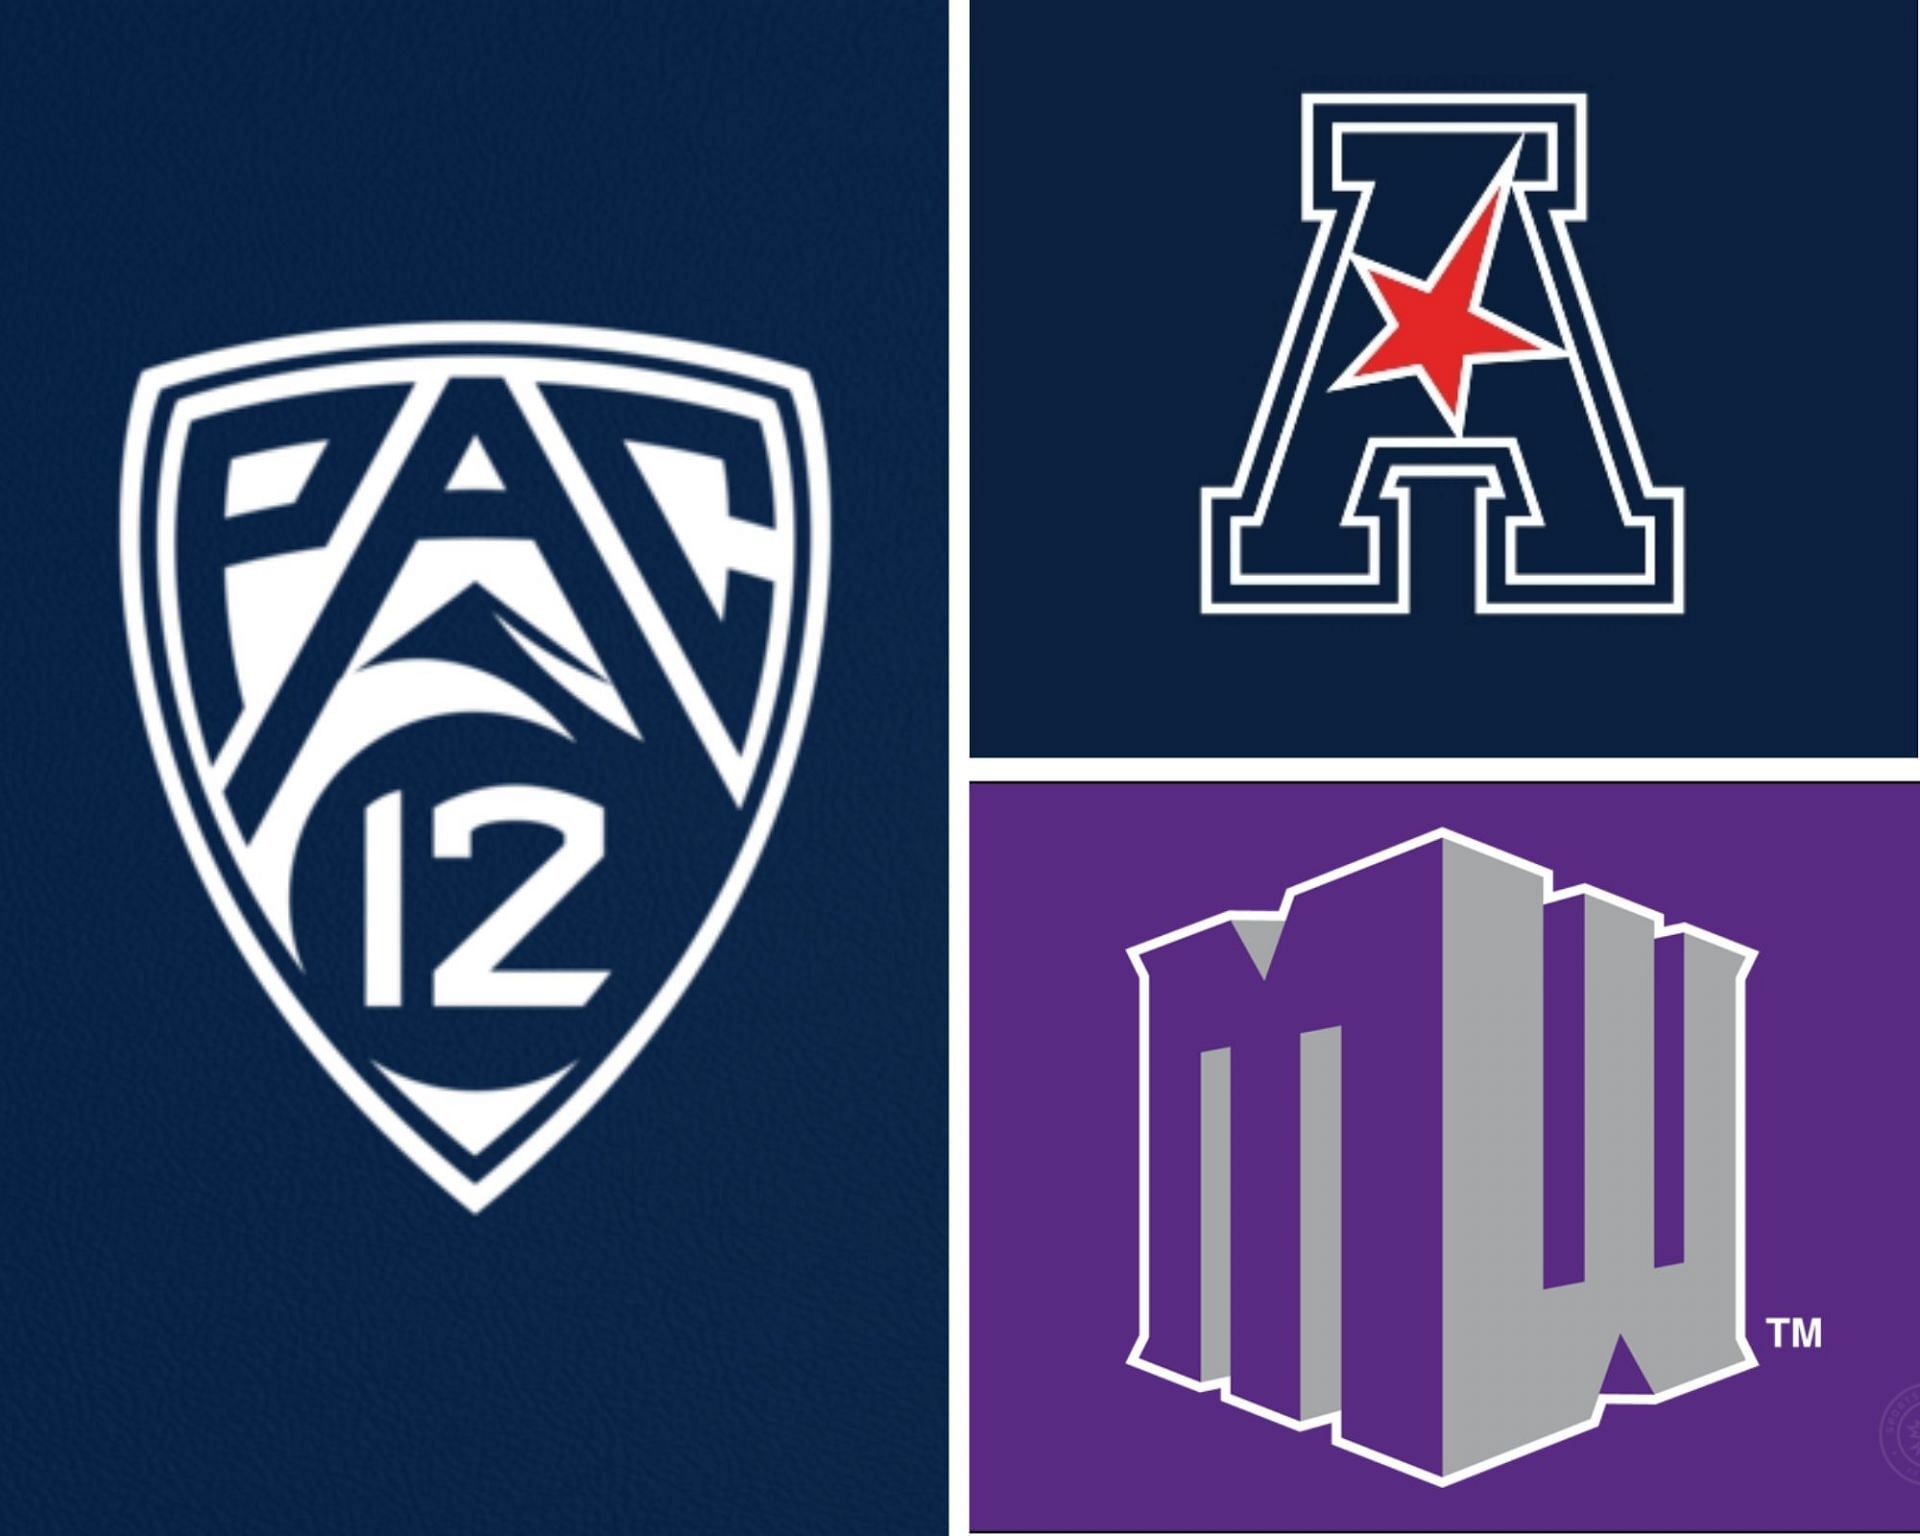 Will the Pac-12 be pursuing a merger? 